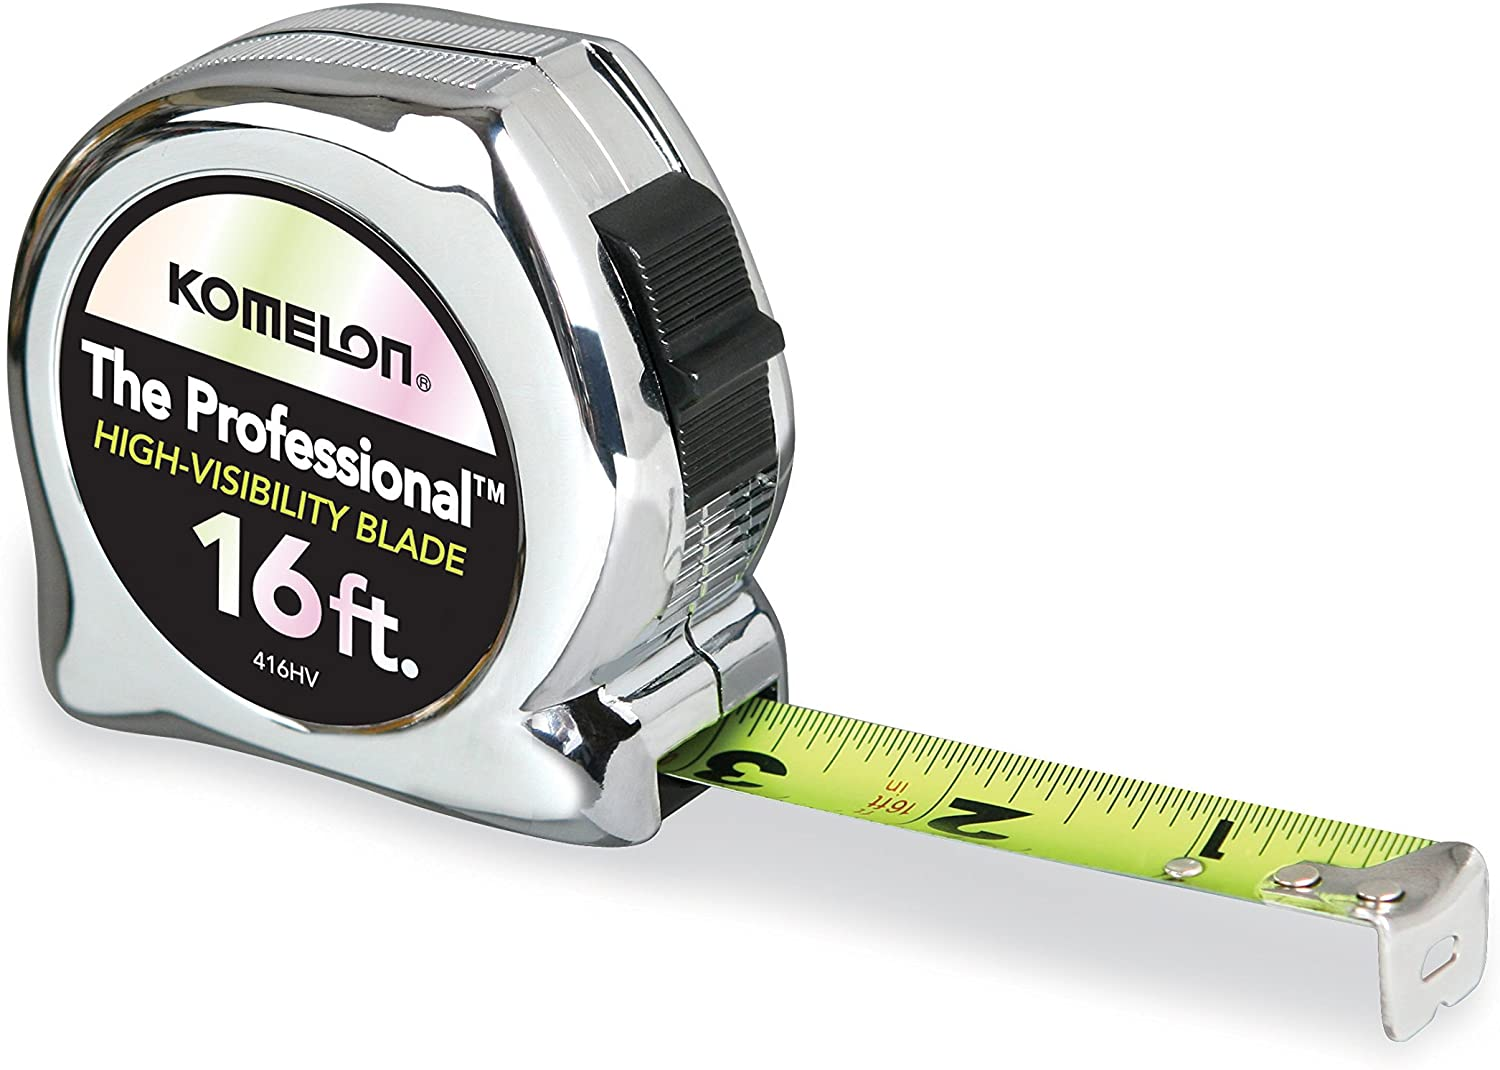 Komelon 416HV High-Visibility Professional Tape Measure (Chrome) 16-Feet by 3/4-Inch $7.98